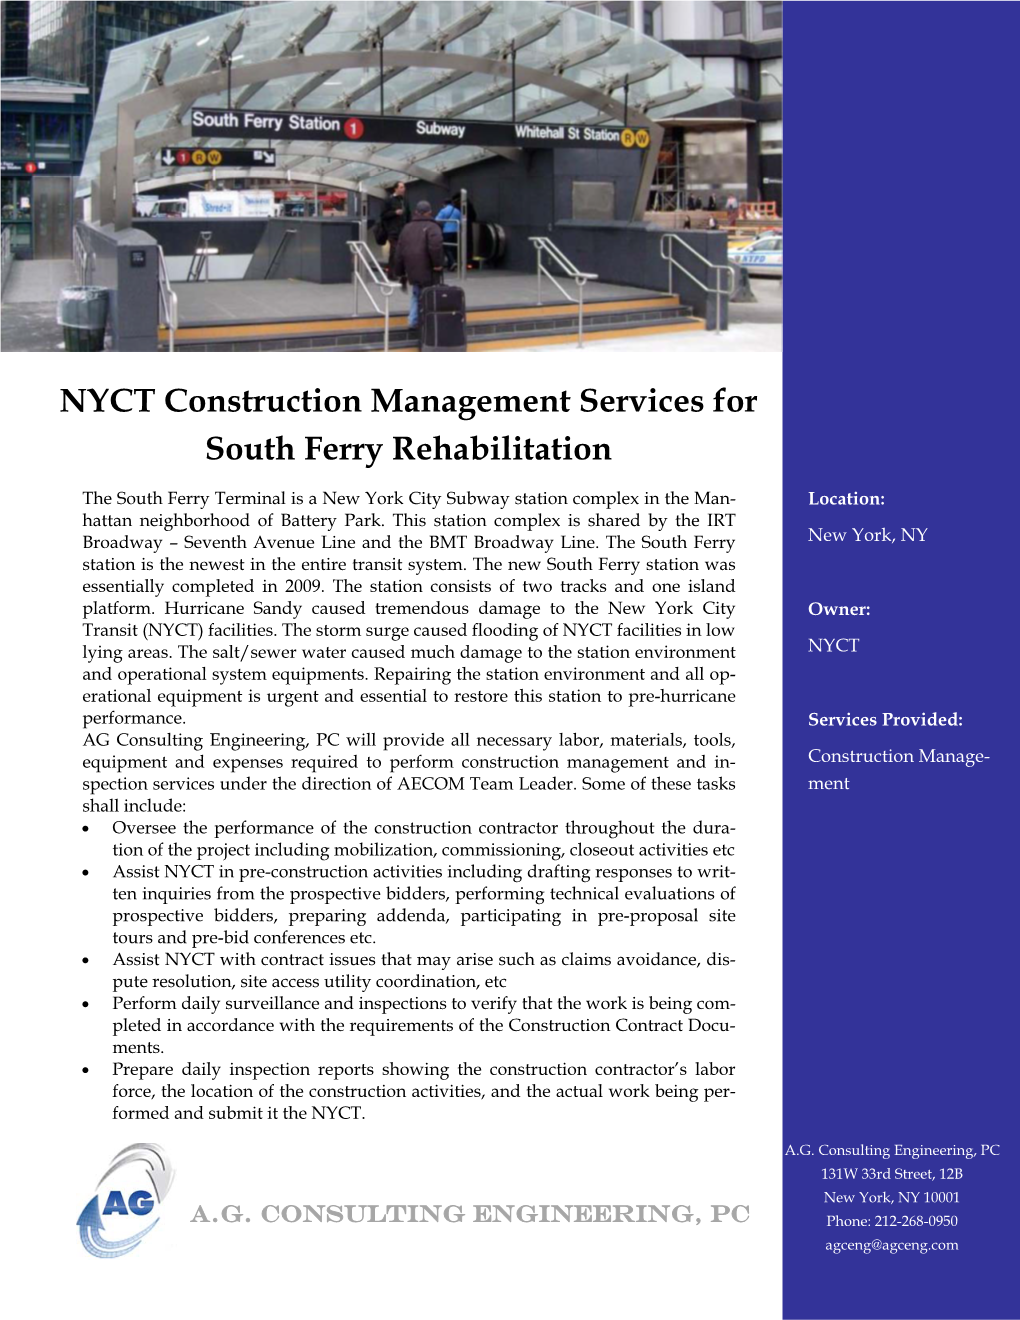 NYCT CM Services for South Ferry Rehabilitation